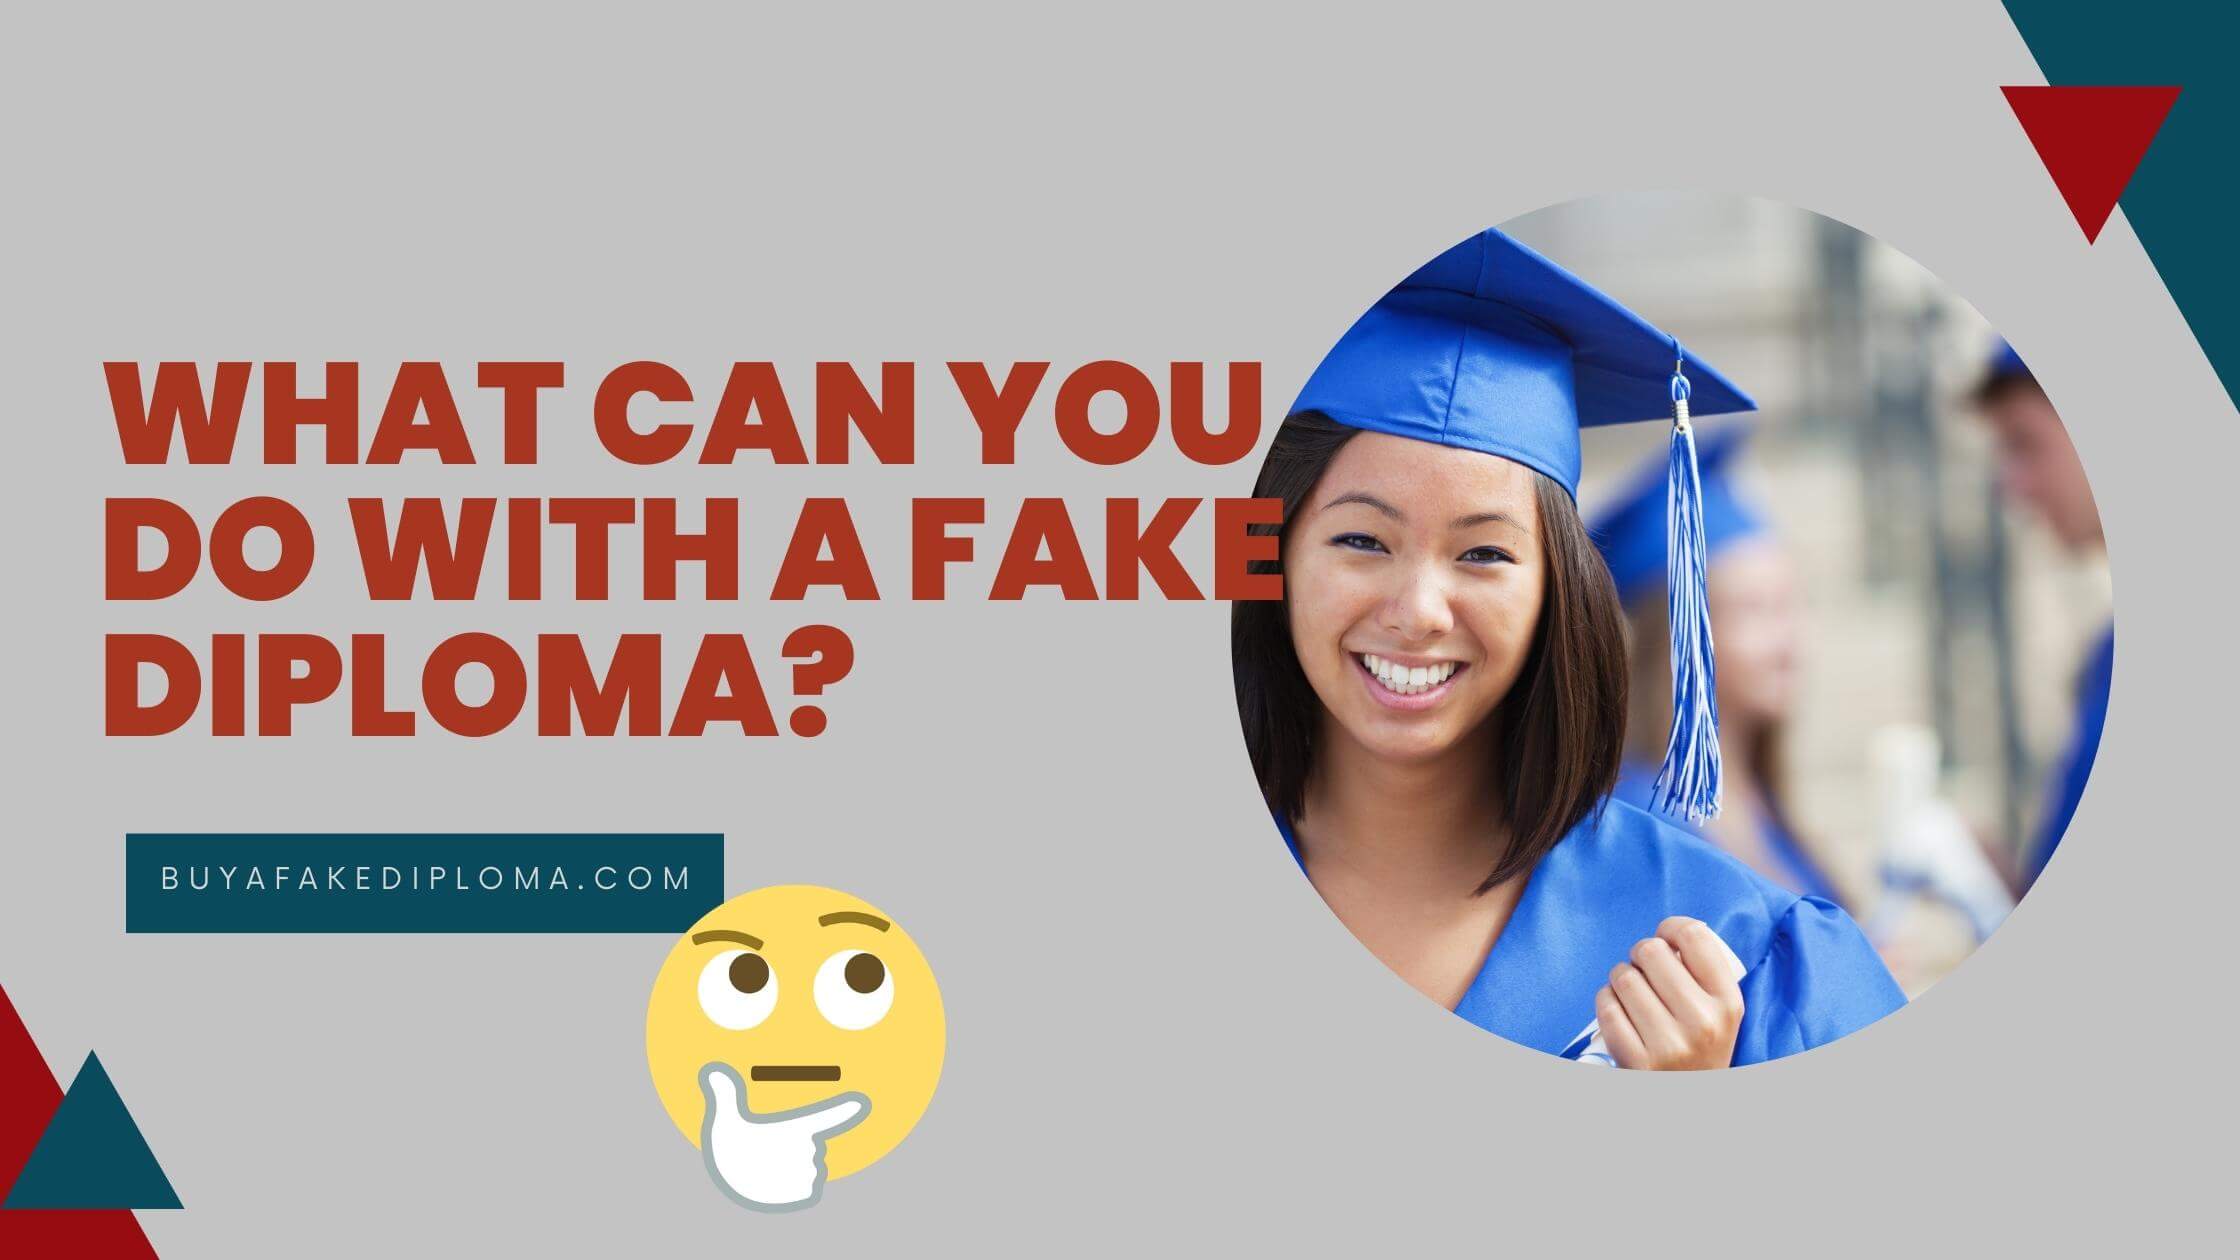 What Can You Do With a Fake Diploma